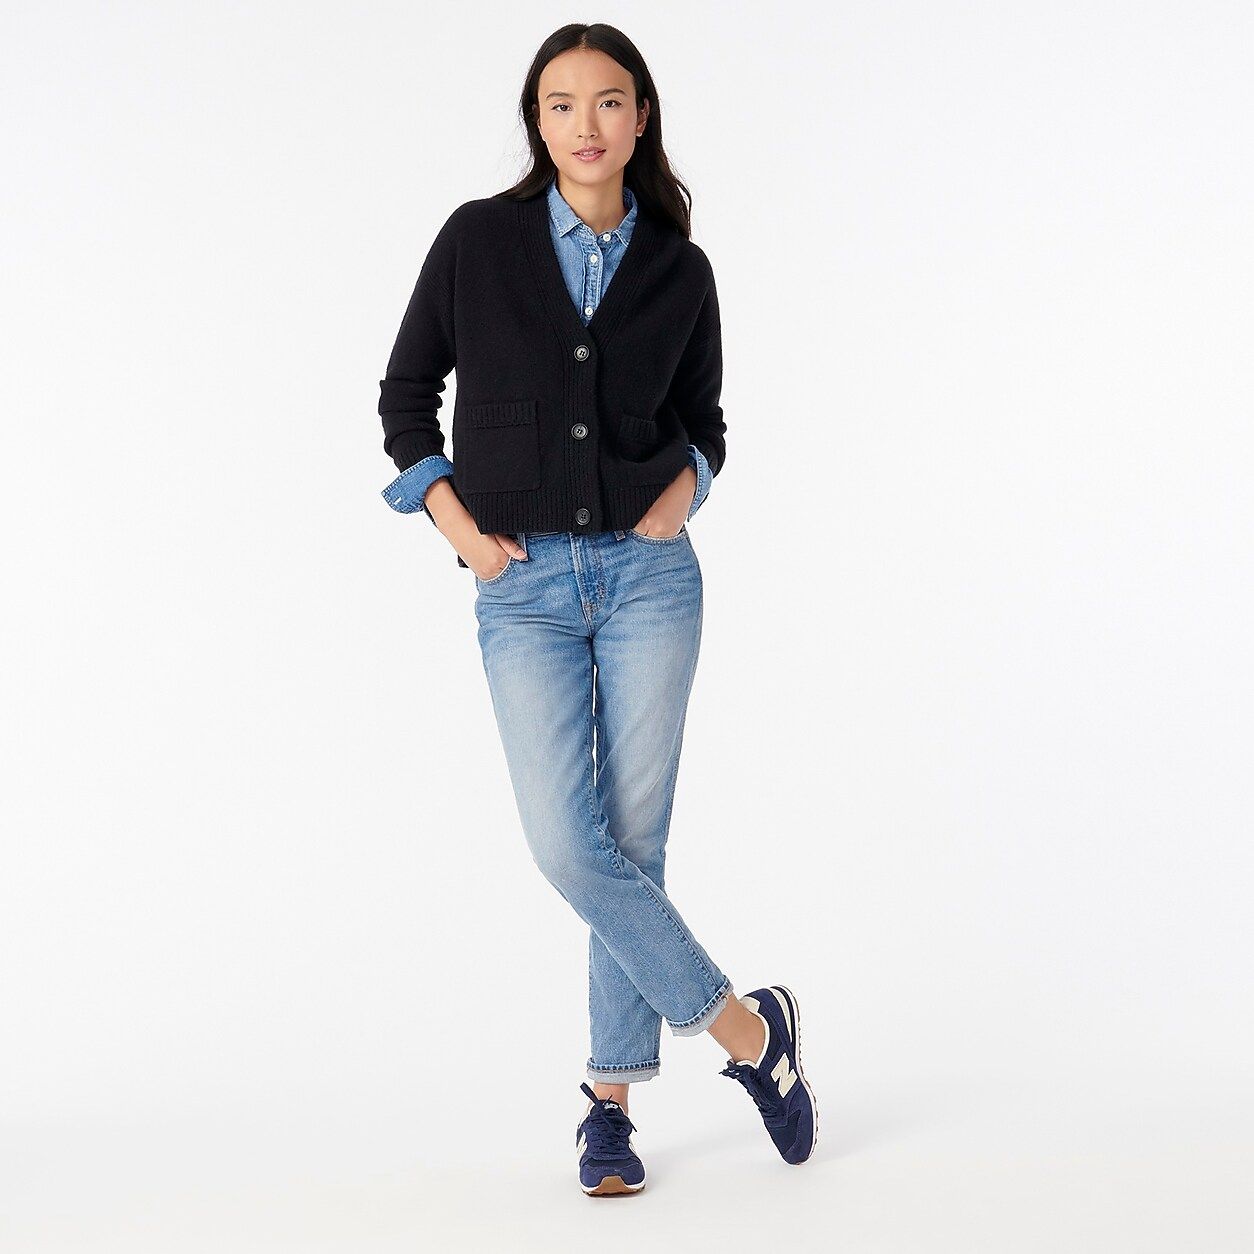 Cropped cardigan sweater in supersoft yarn | J.Crew US